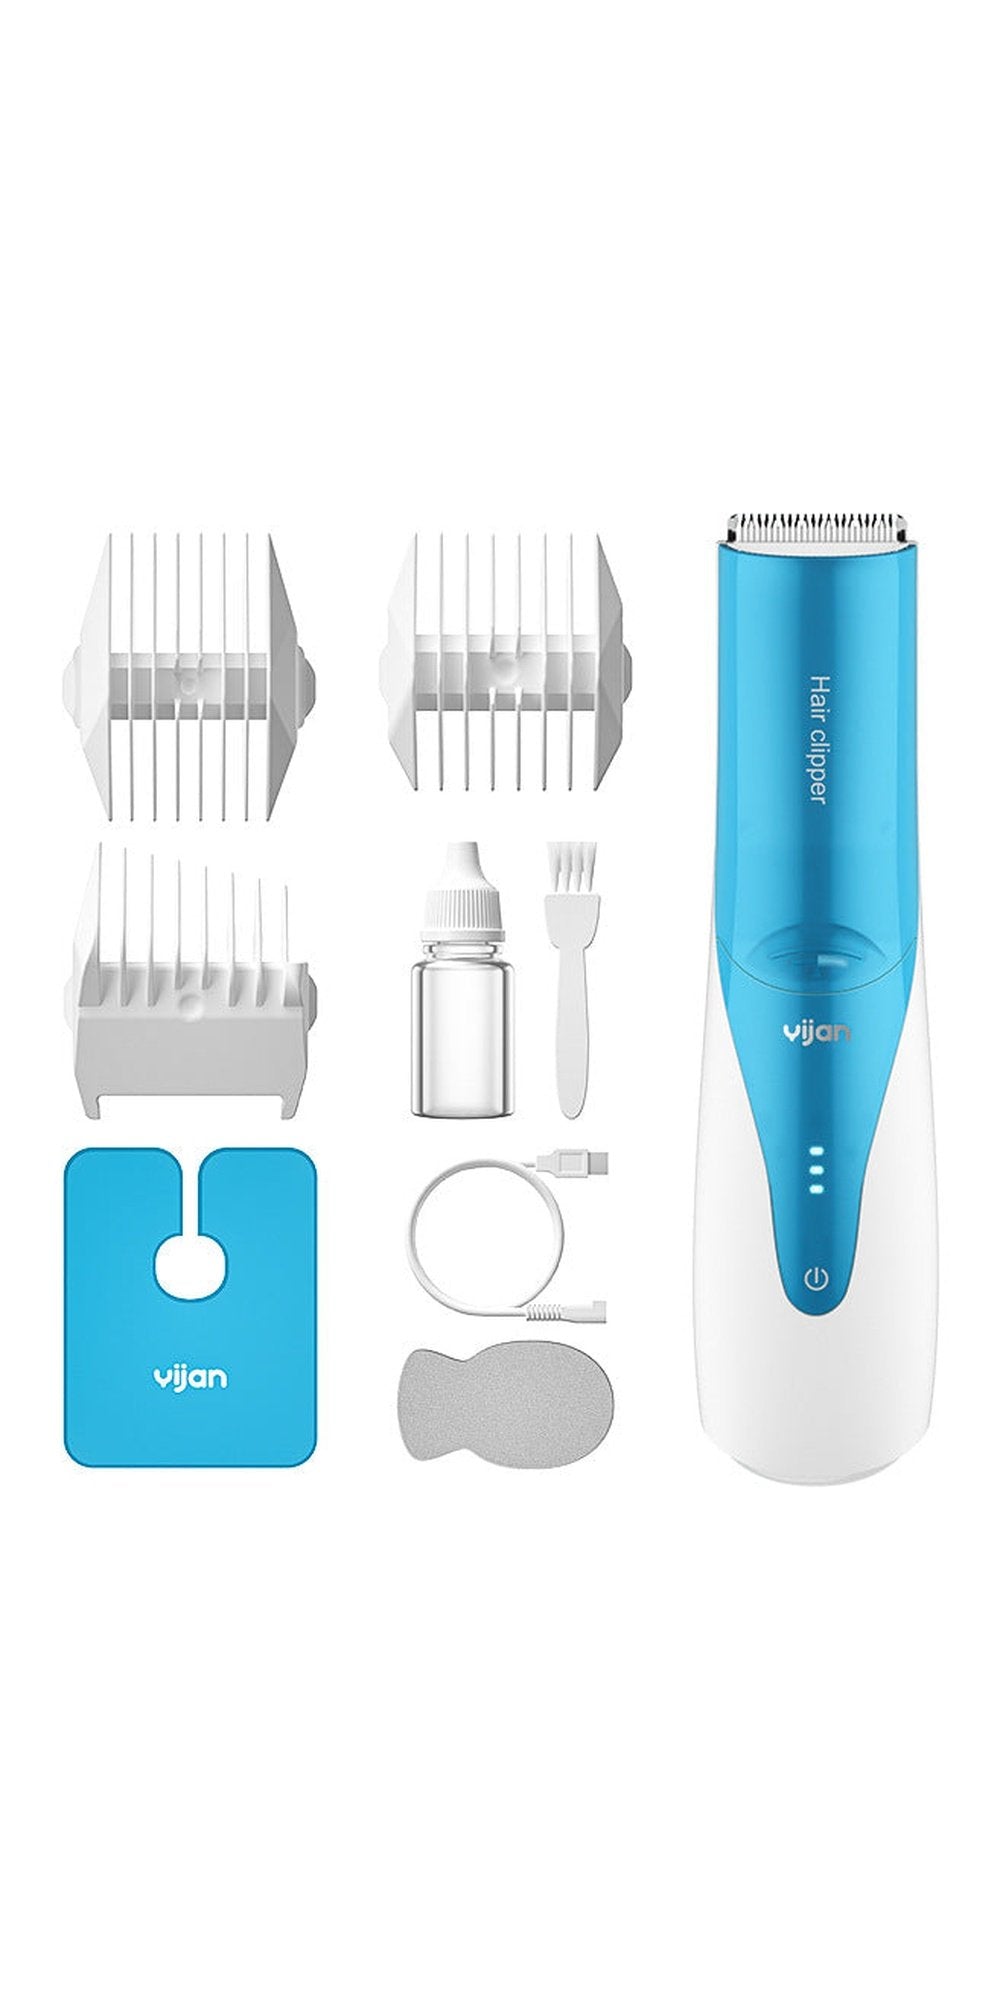 An image displaying a professional hair clipper designed for precise and clean cuts. The sleek blue and white design emphasizes its high-quality build.